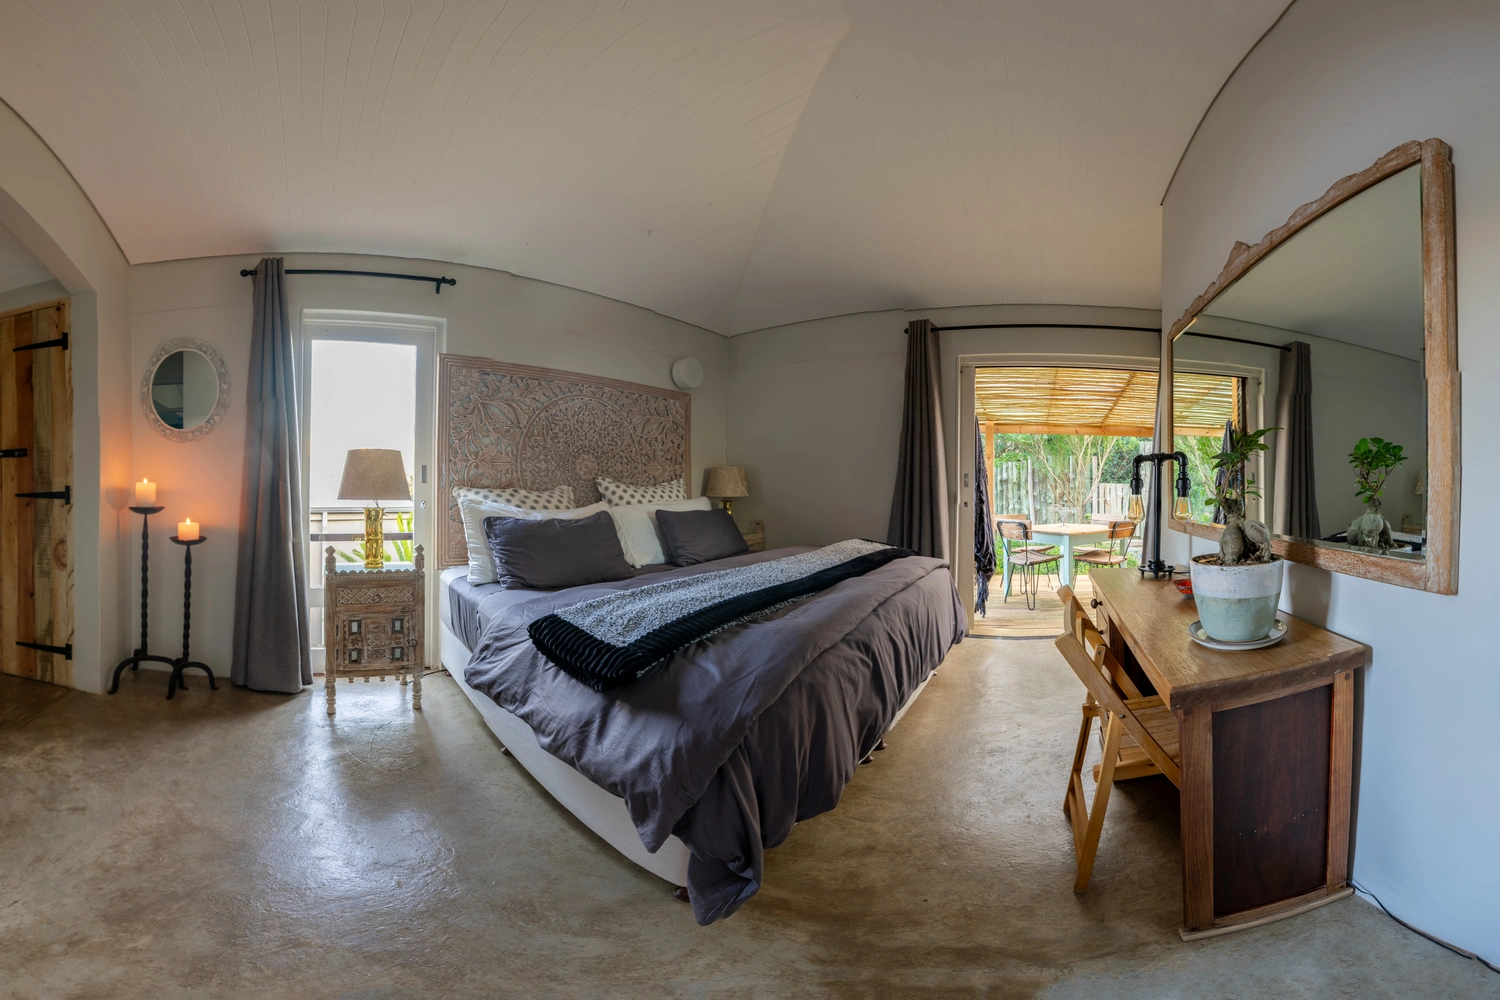 A full panoramic view of the bedroom